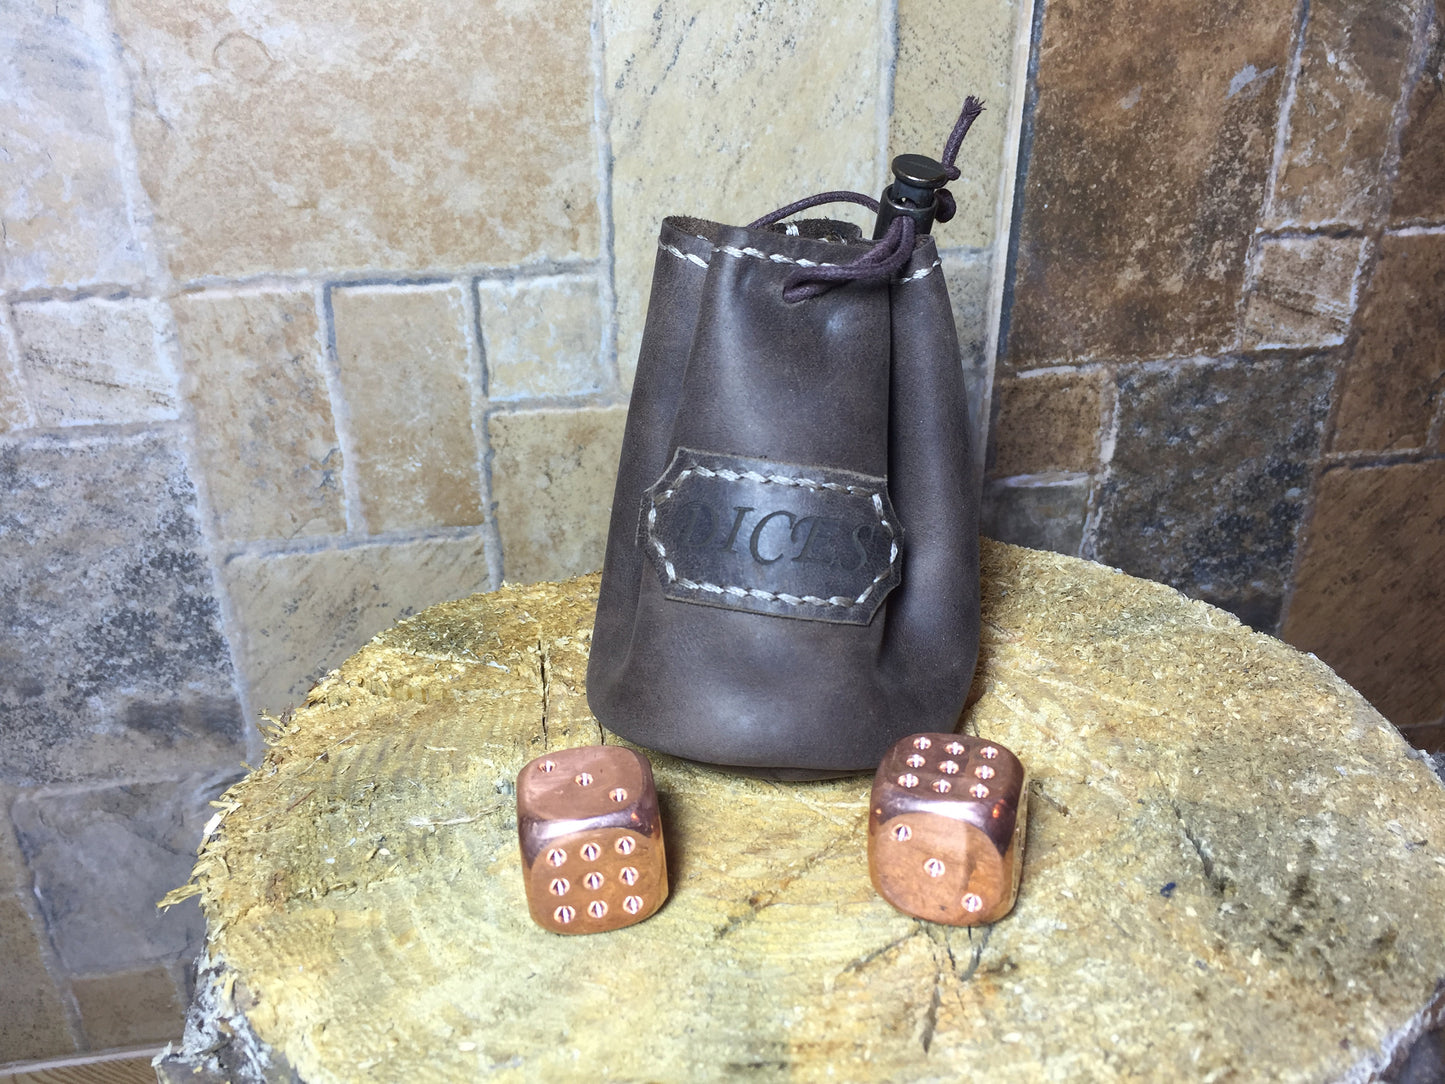 Copper dice set in a leather bag, metal dice, gambling dice, gaming dice, custom dice, iron dice,groomsman gift,steel dice,role playing game